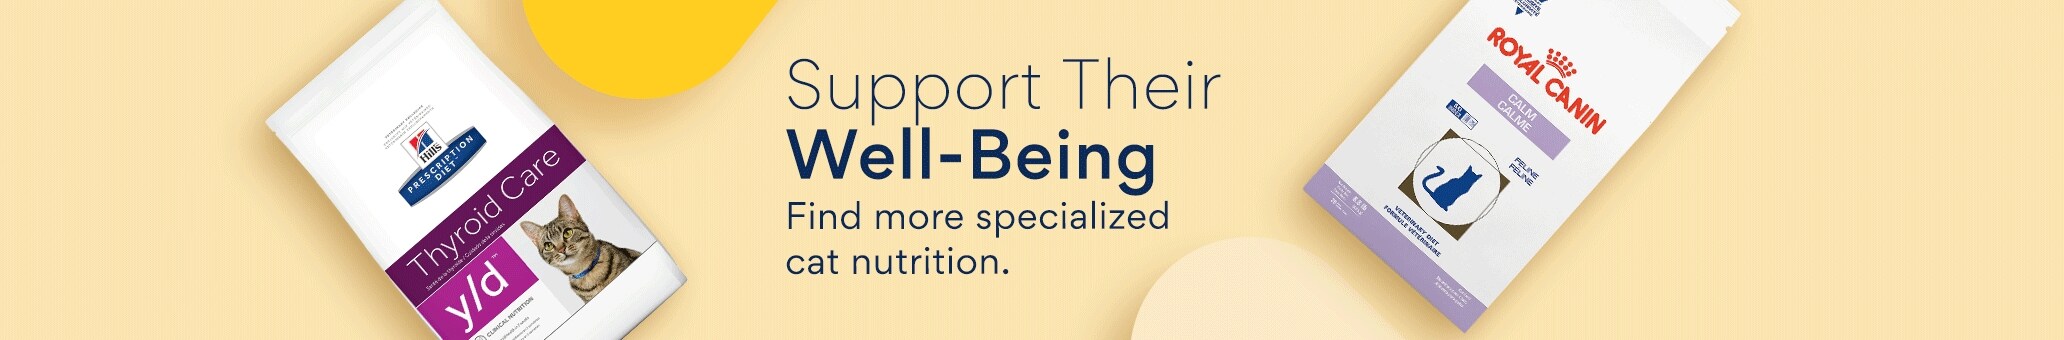 Support Their Well-Being. Find more specialized cat nutrition.